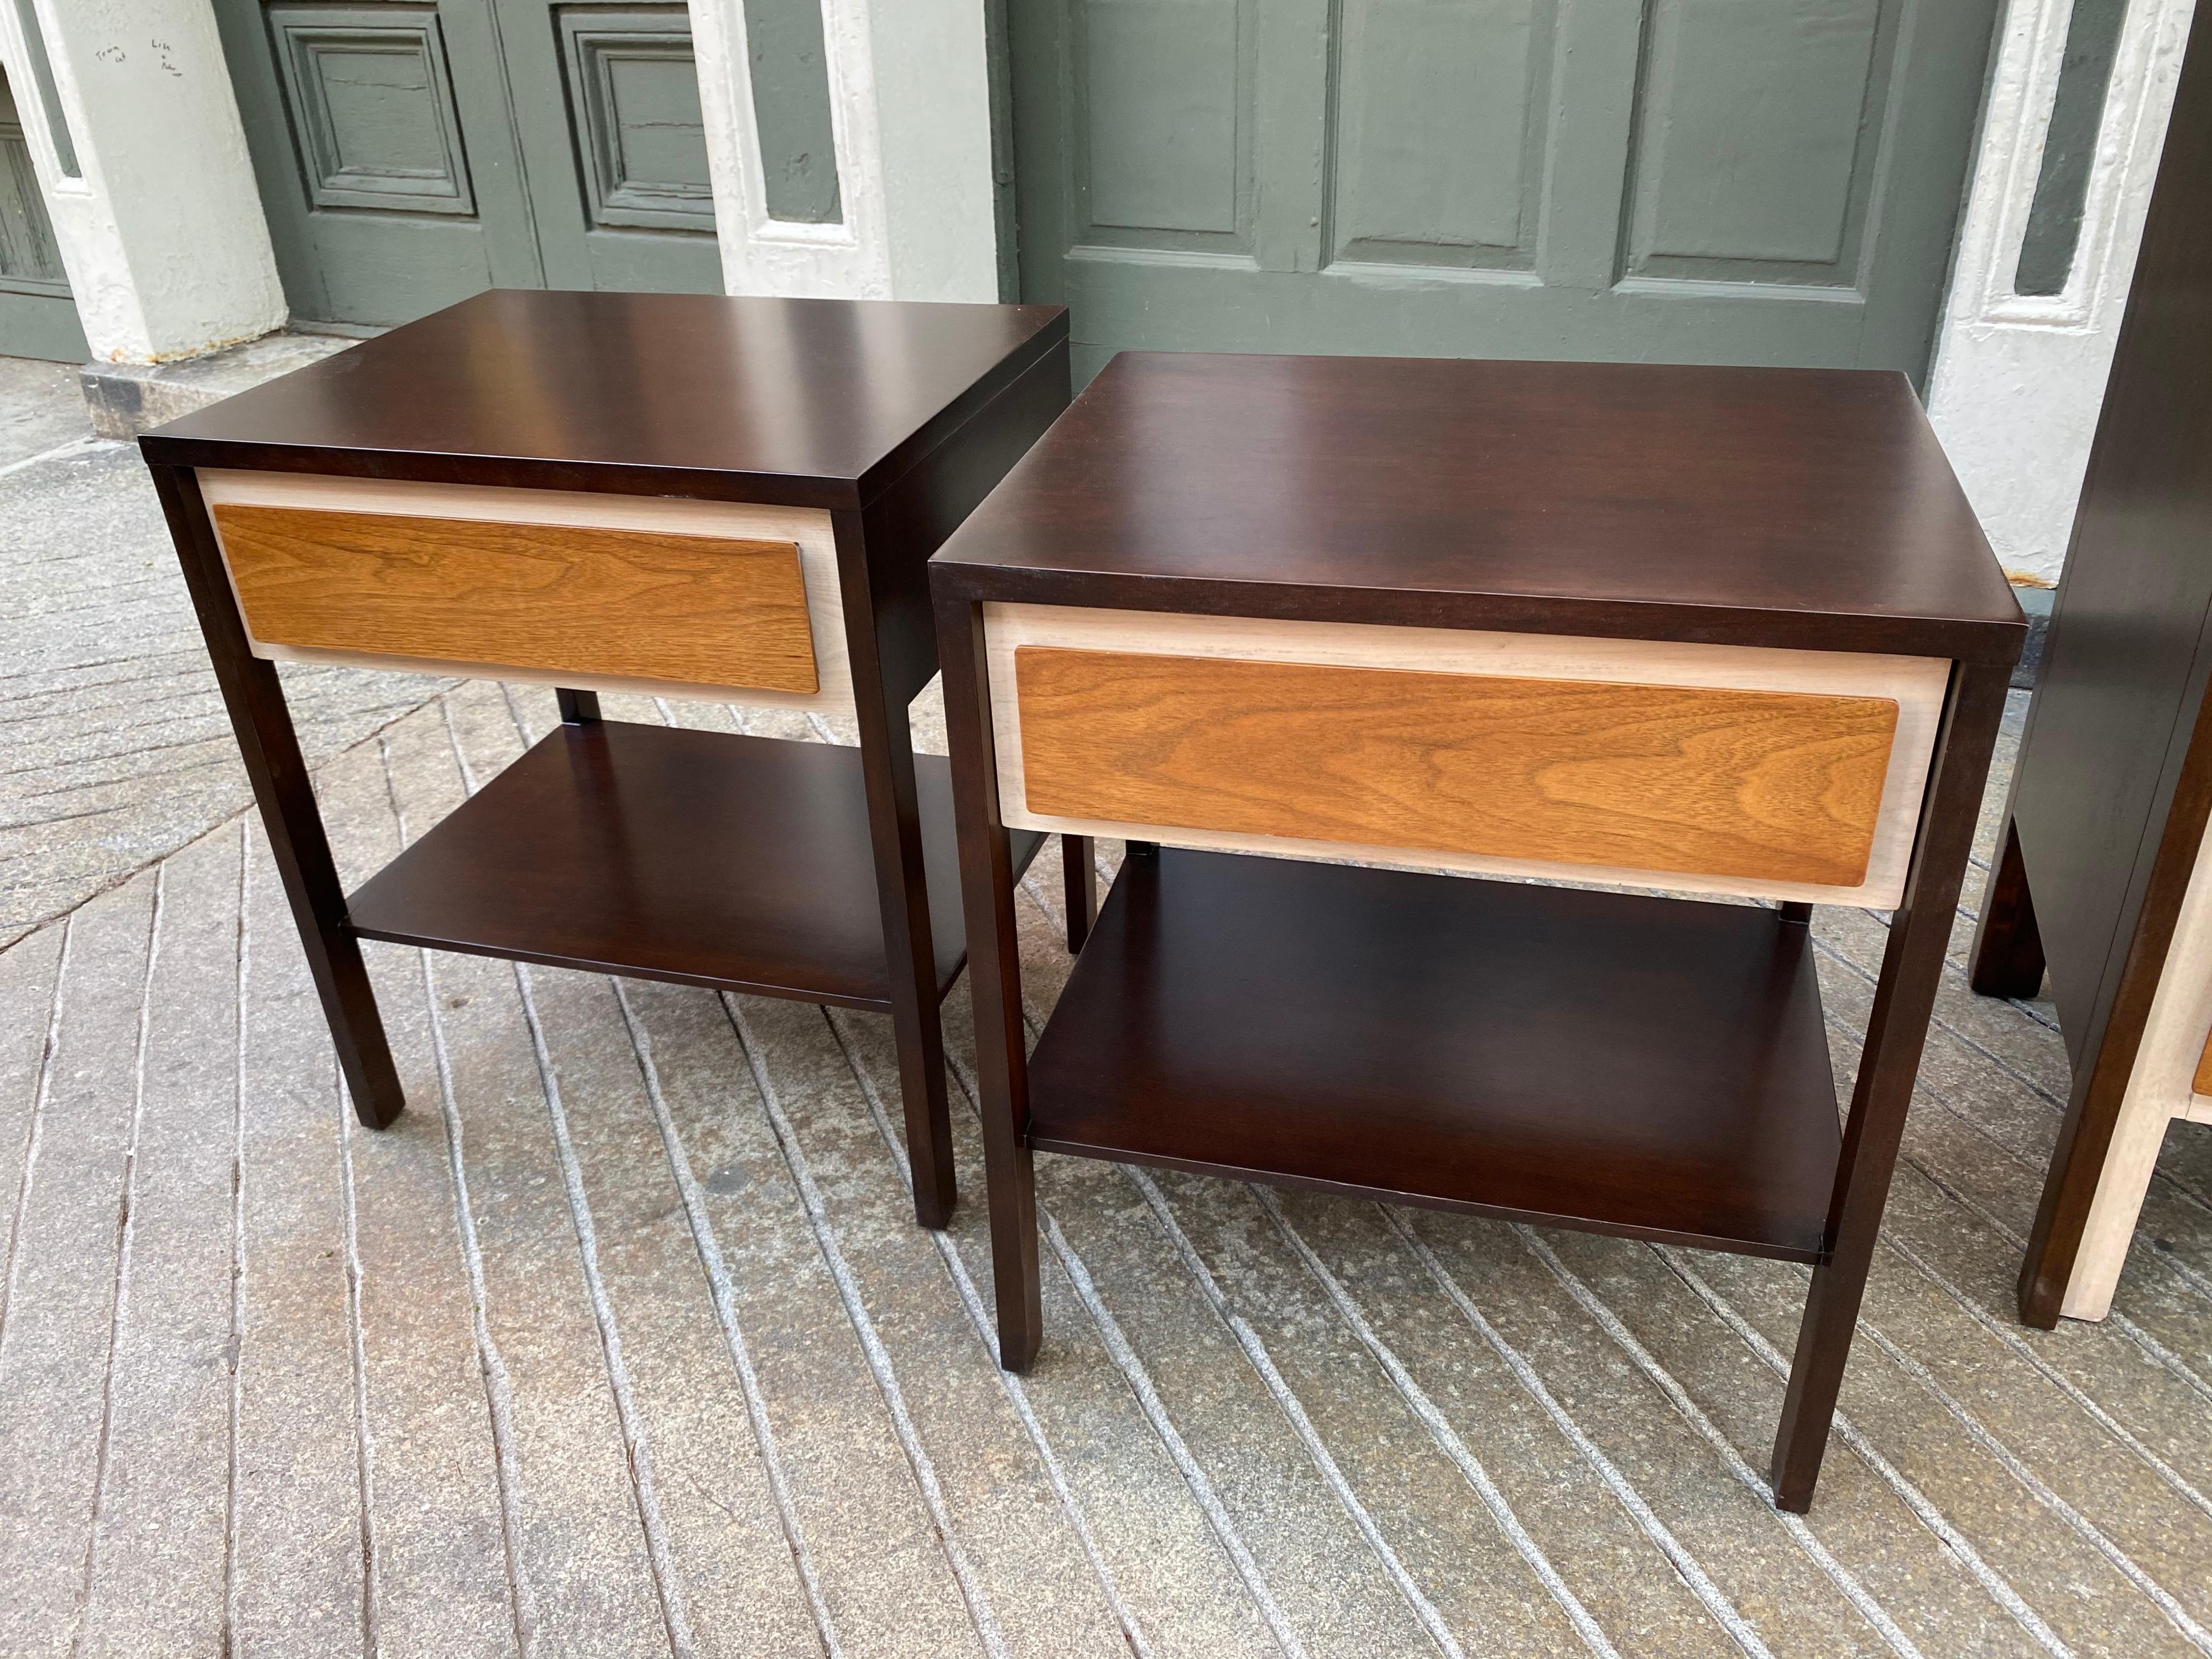 Henredon nightstands inspired by Gio Ponti's 1958 Design for The Singer Furniture Company. Outer body finished in a dark walnut, drawer fronts in a light walnut with a cream back. All refinished and ready to go!